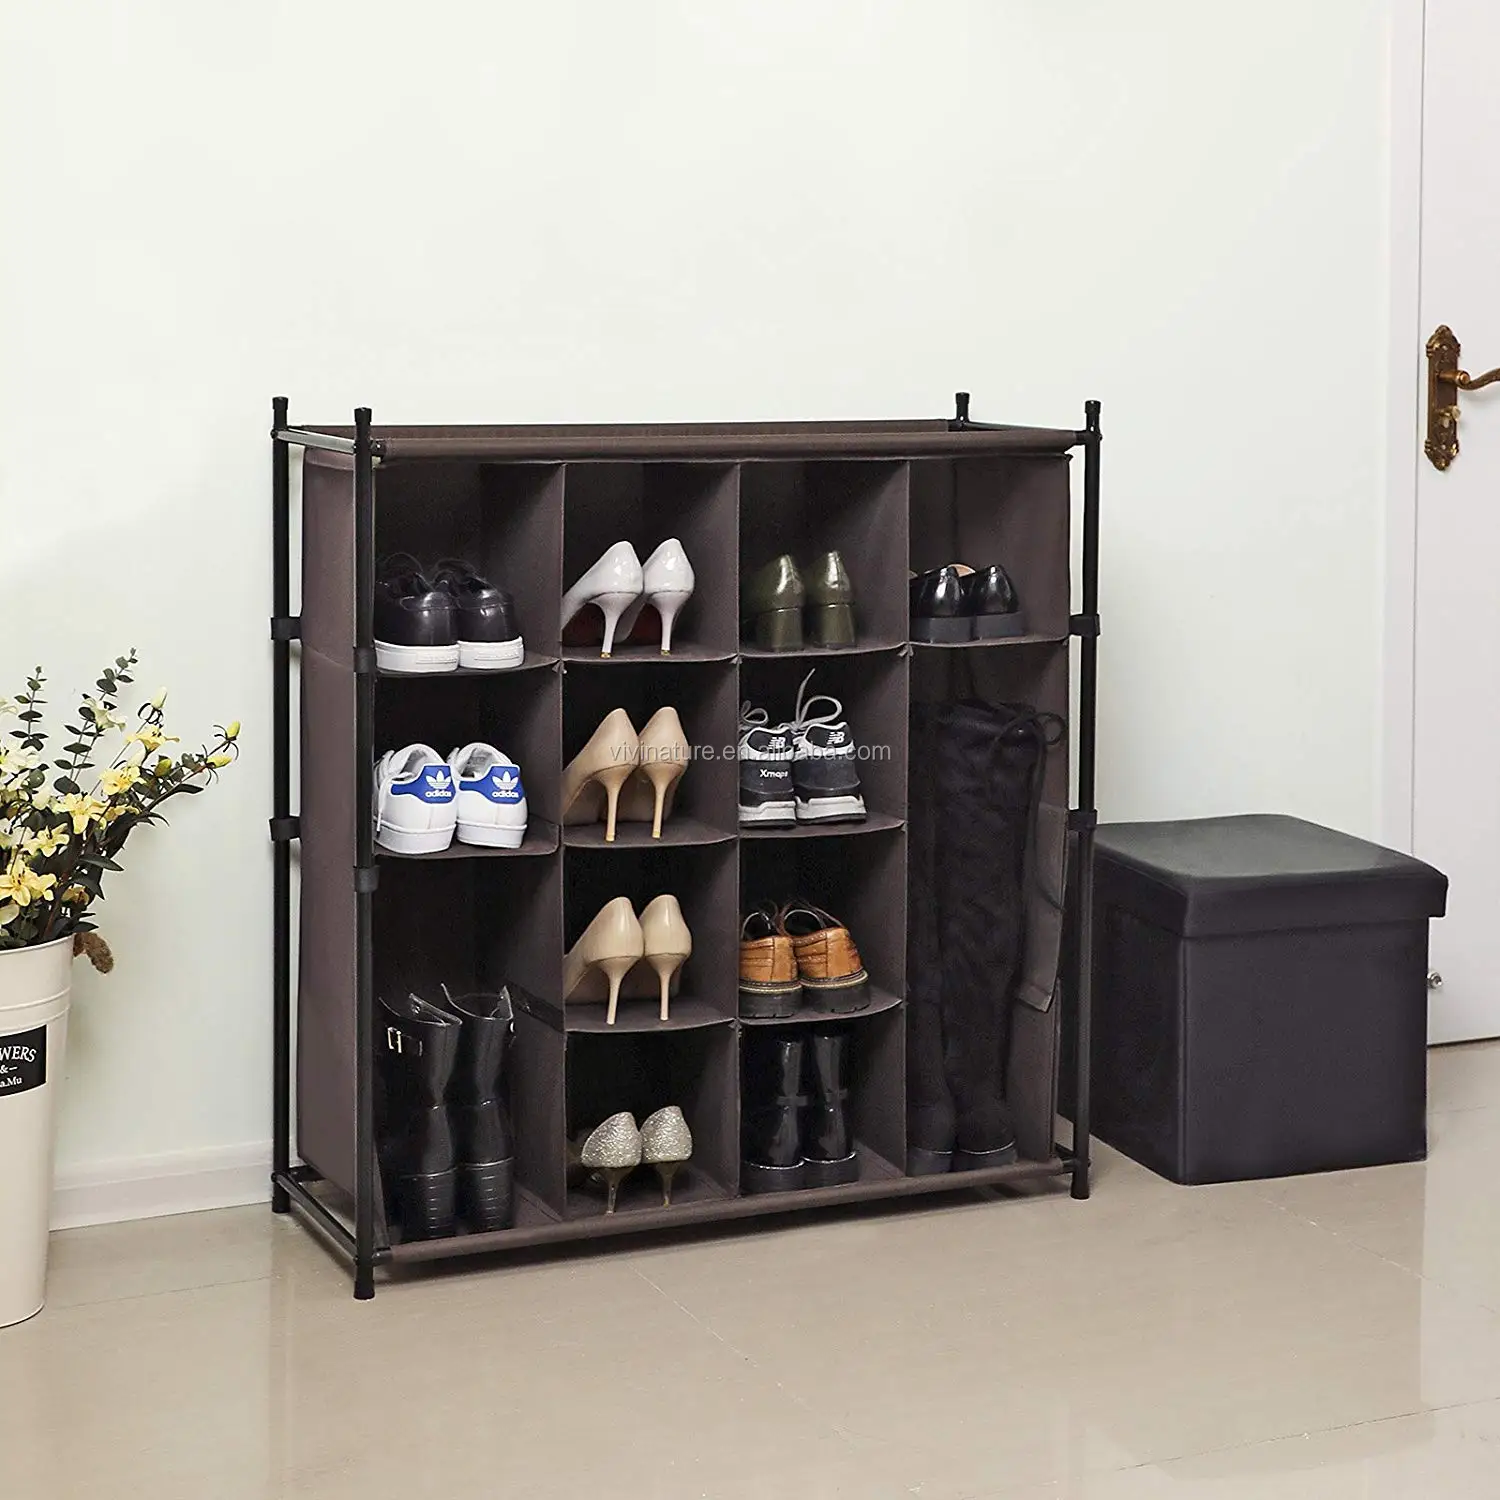 Shoe Rack For 36 Pairs Of Shoes Standing Storage Organizer Shelf With Dust Proof Cover Buy Shoes Storage Organizer Shelf Shoe Rack For 36 Pairs Shoes Shelf Commercial Shoe Rack Product On Alibaba Com